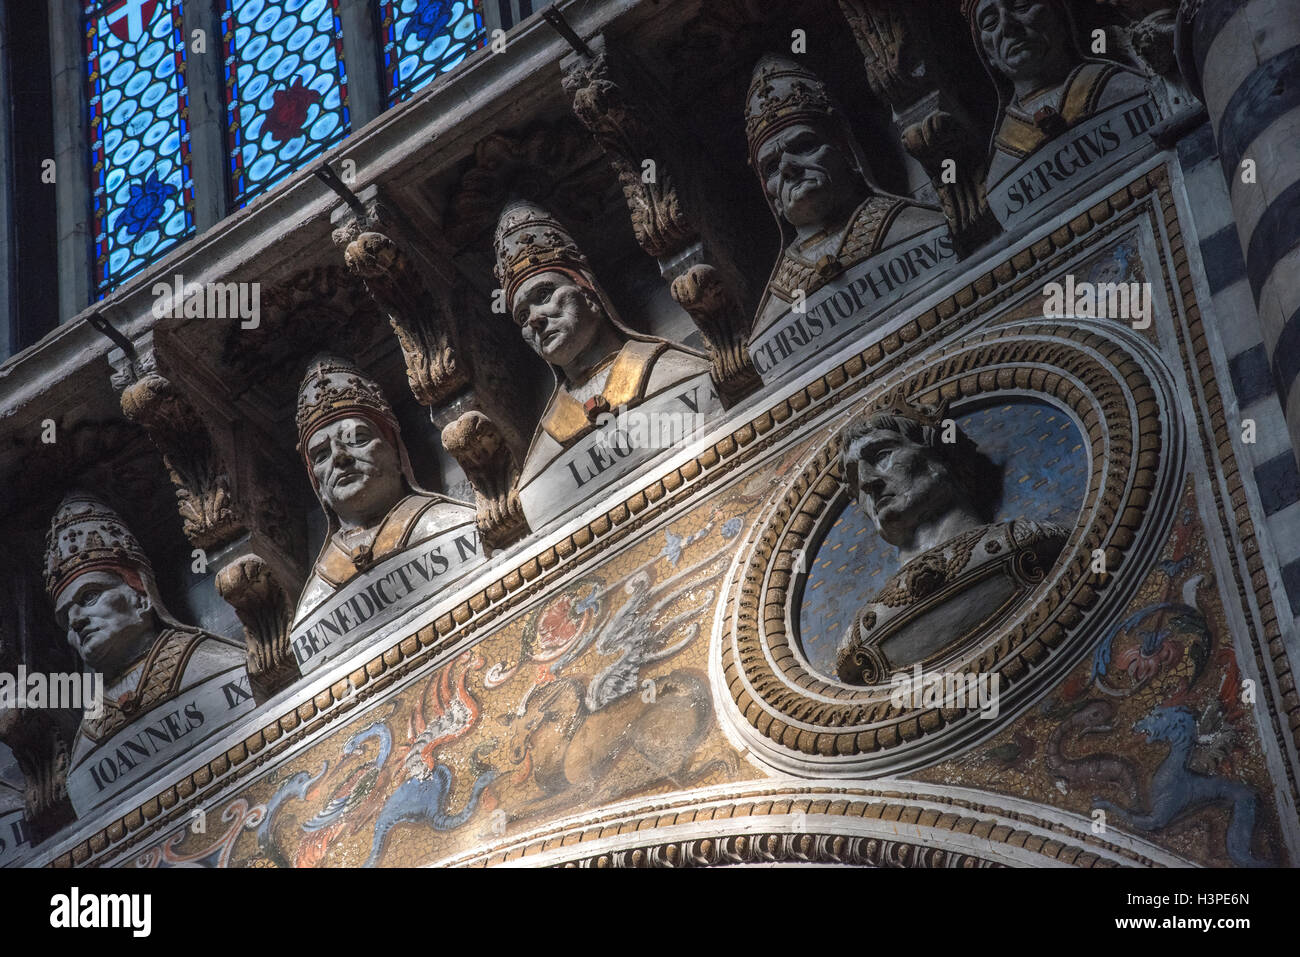 Siena, Tuscany, Italy. September 2016 The Duomo or Cathedral interior view showing Popes of Italy Stock Photo